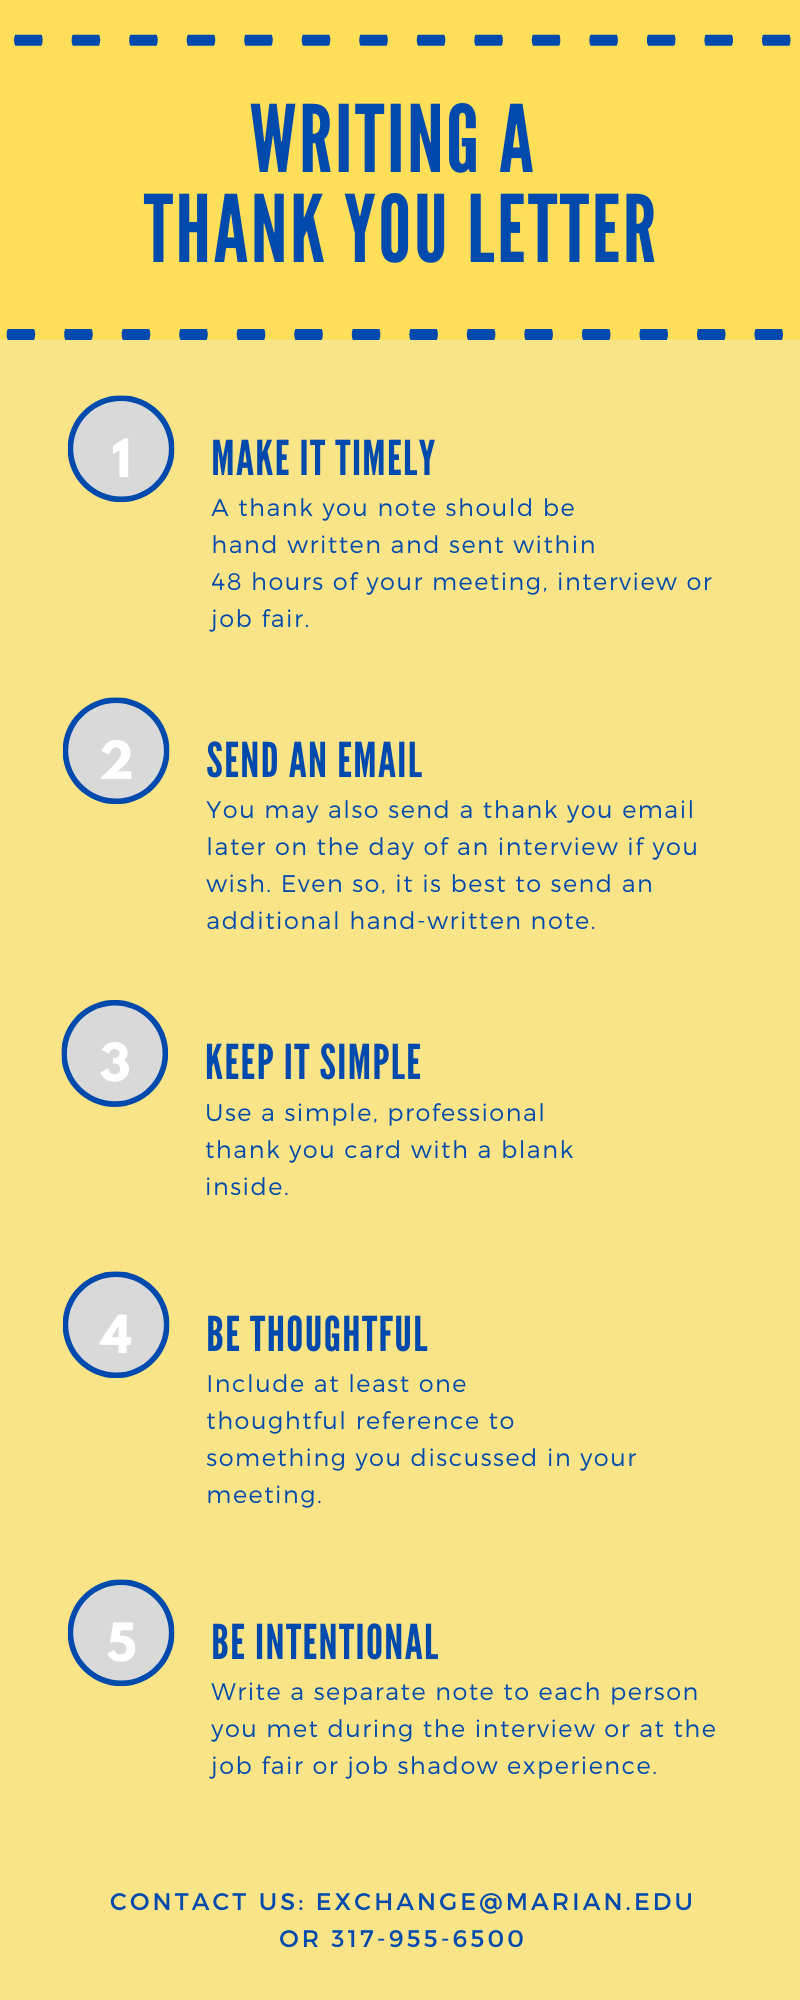 Thank you letter infographic